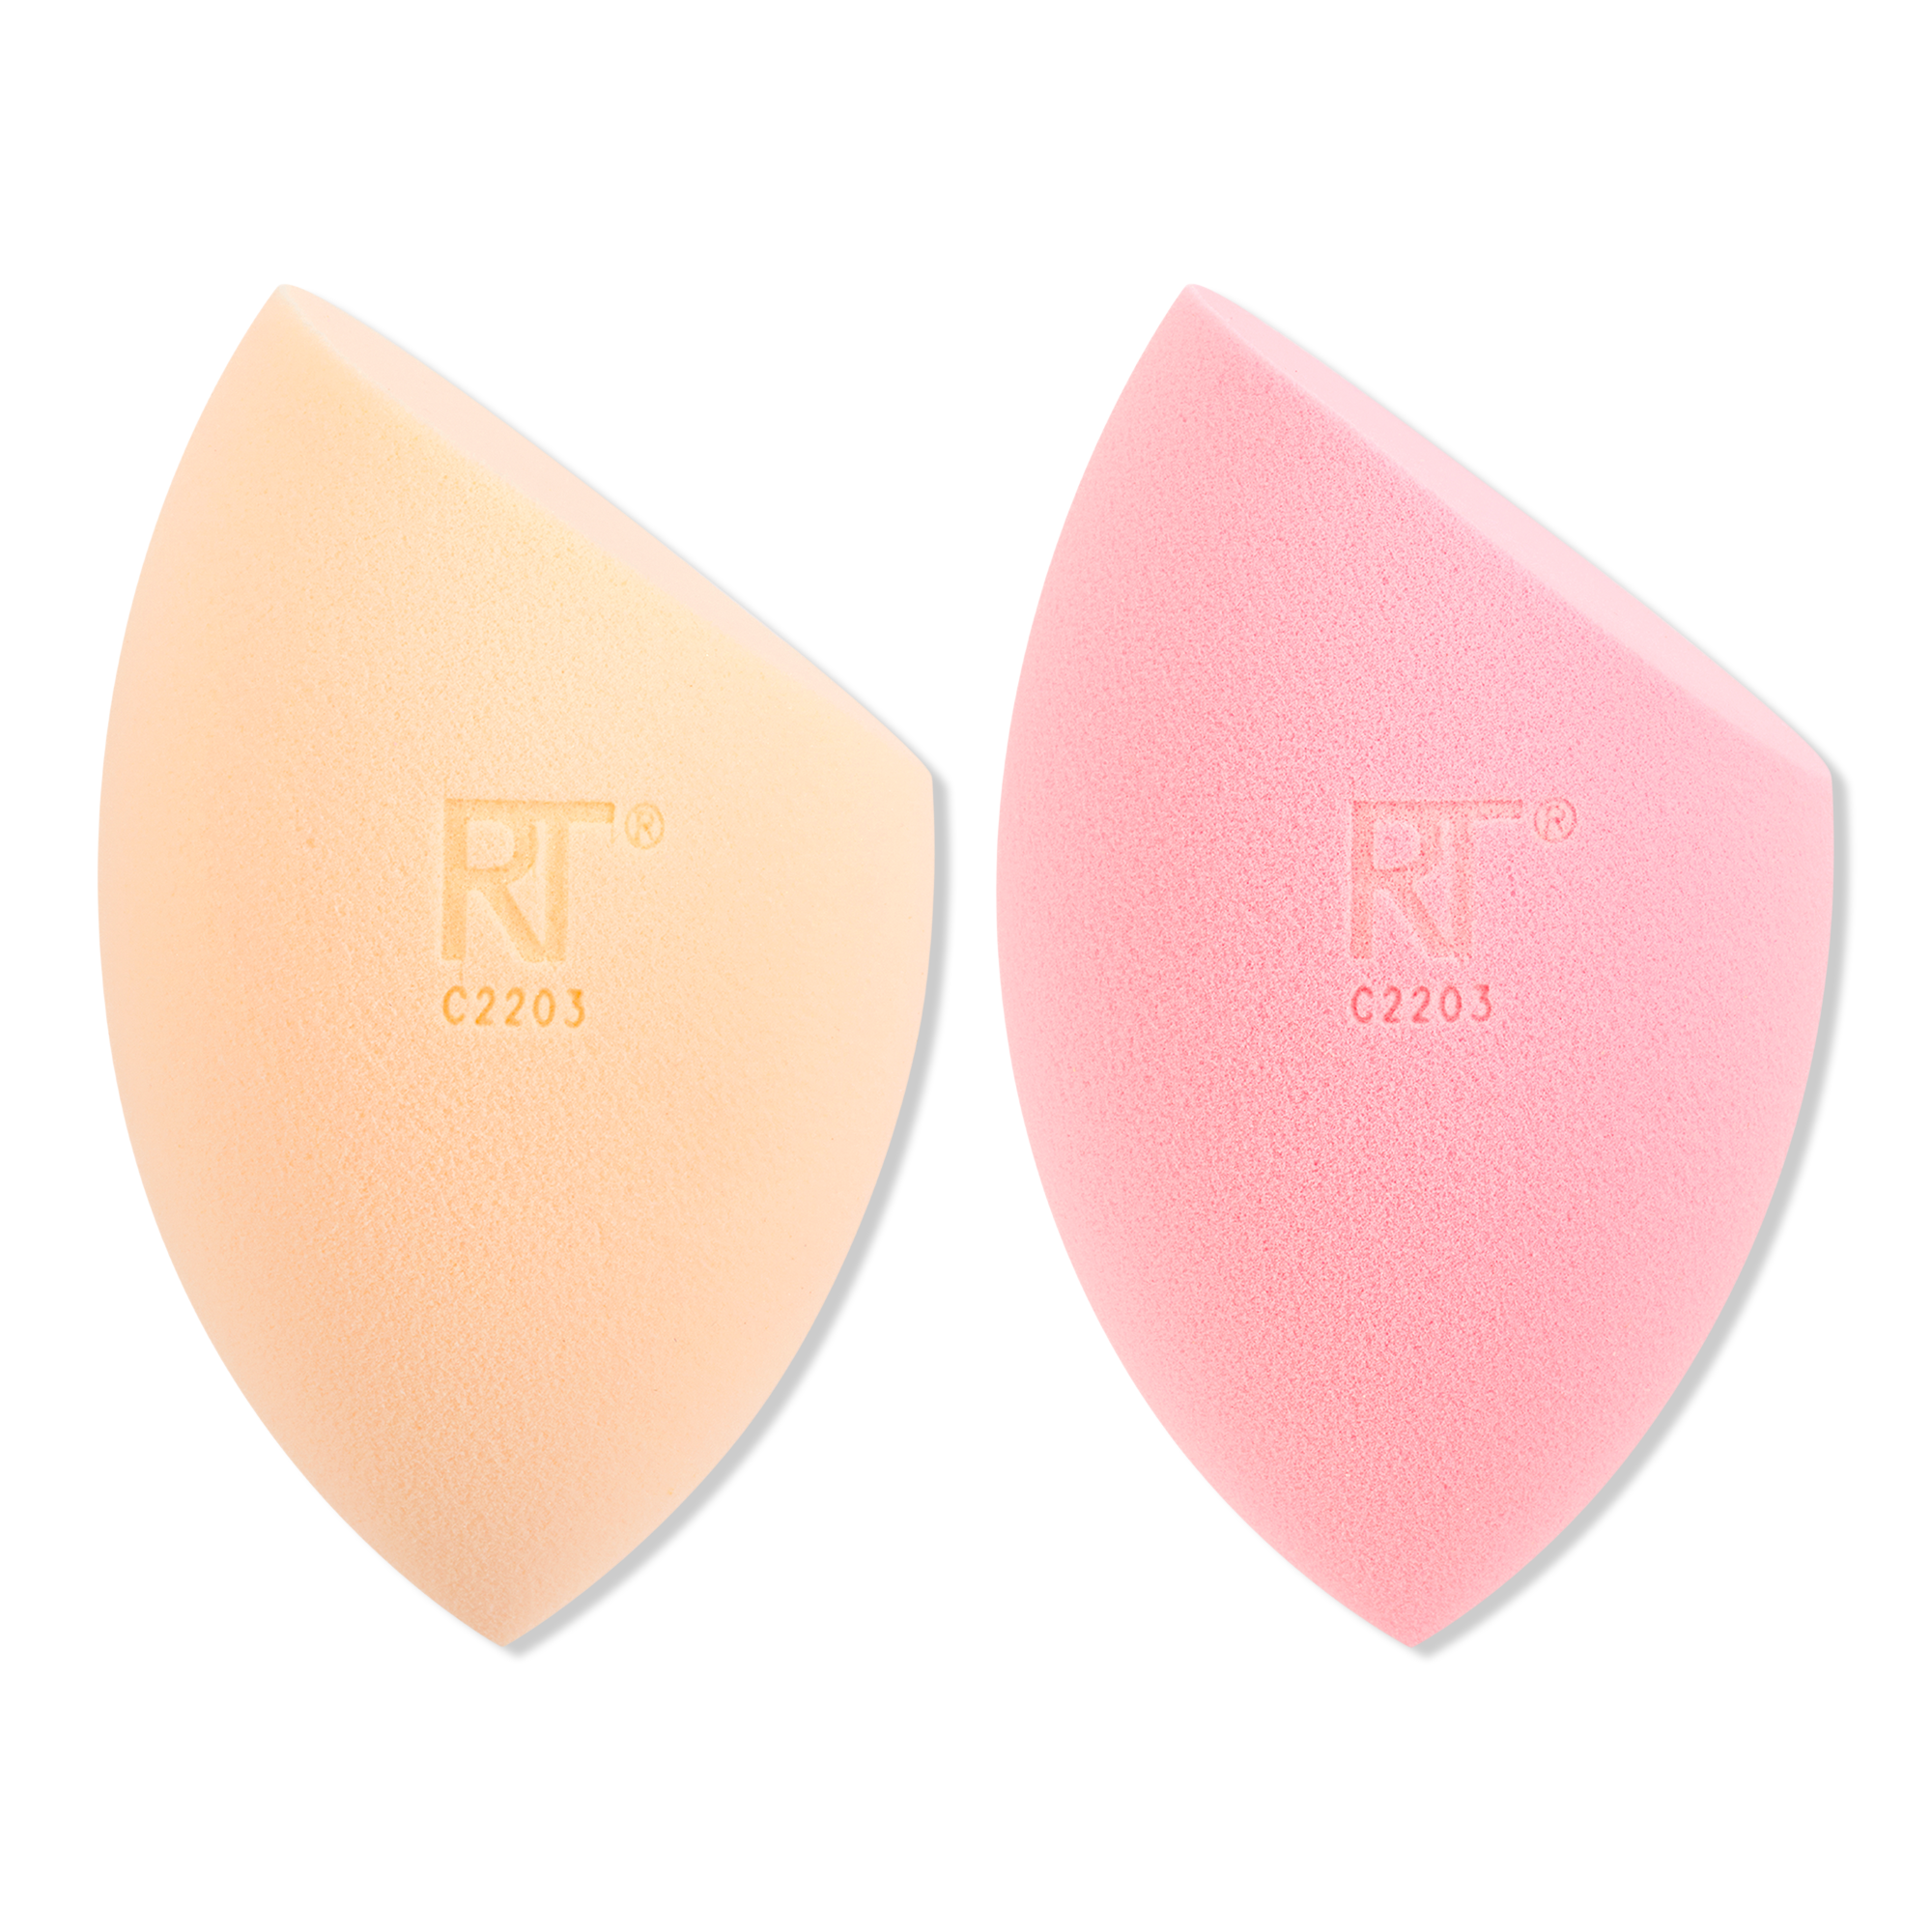 REAL TECHNIQUES PASTEL POP MIRACLE COMPLEXION SPONGE DUO INTERNATIONAL SHIPPING